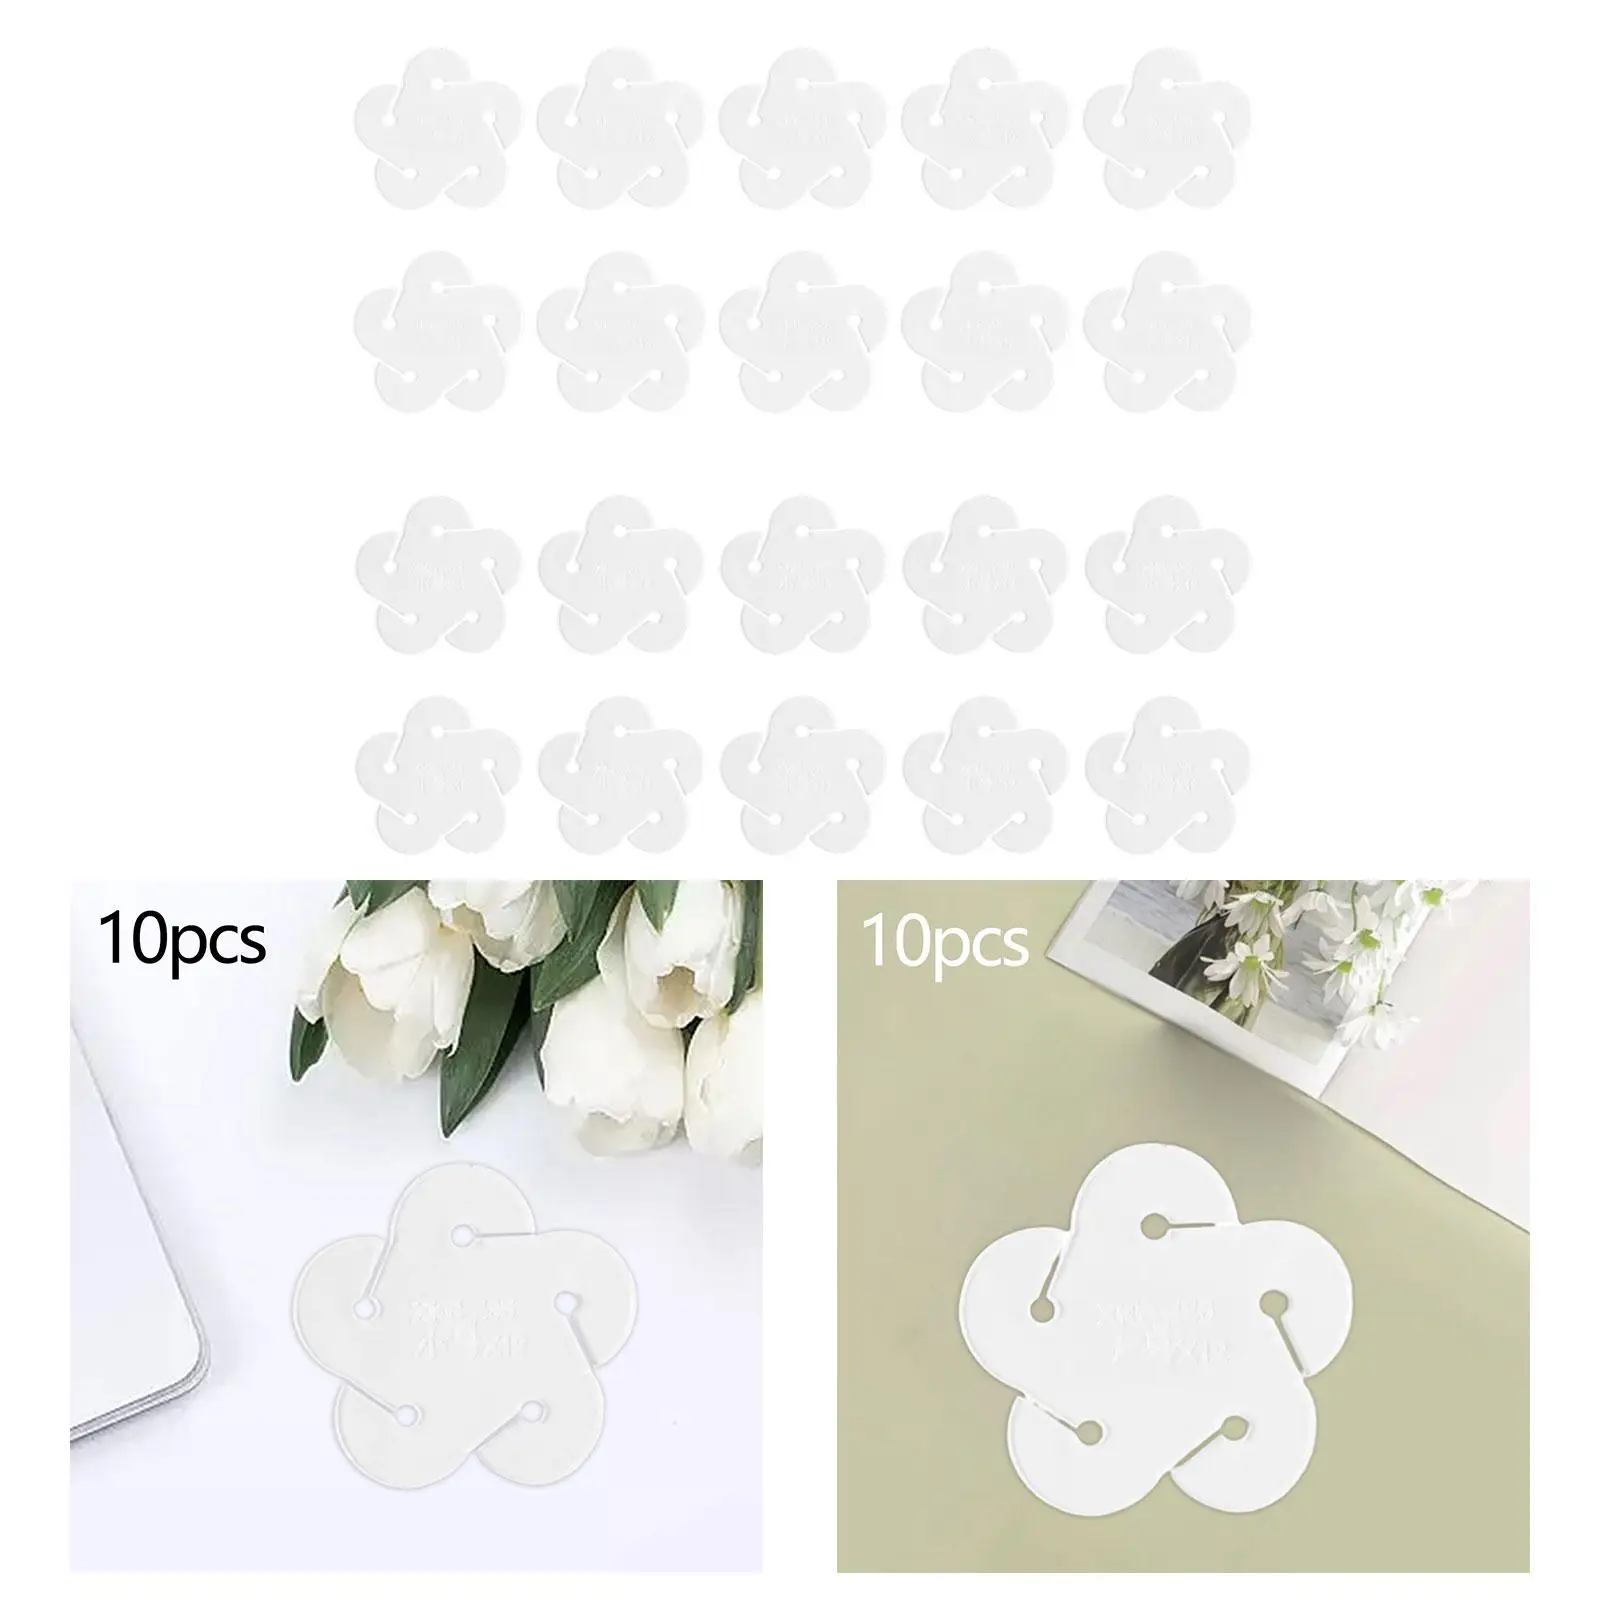 10 Pieces Key Chain Multifunction Durable Handmade Sewing Tool Leather Craft Pattern Stencil for Marking Stitching Devices